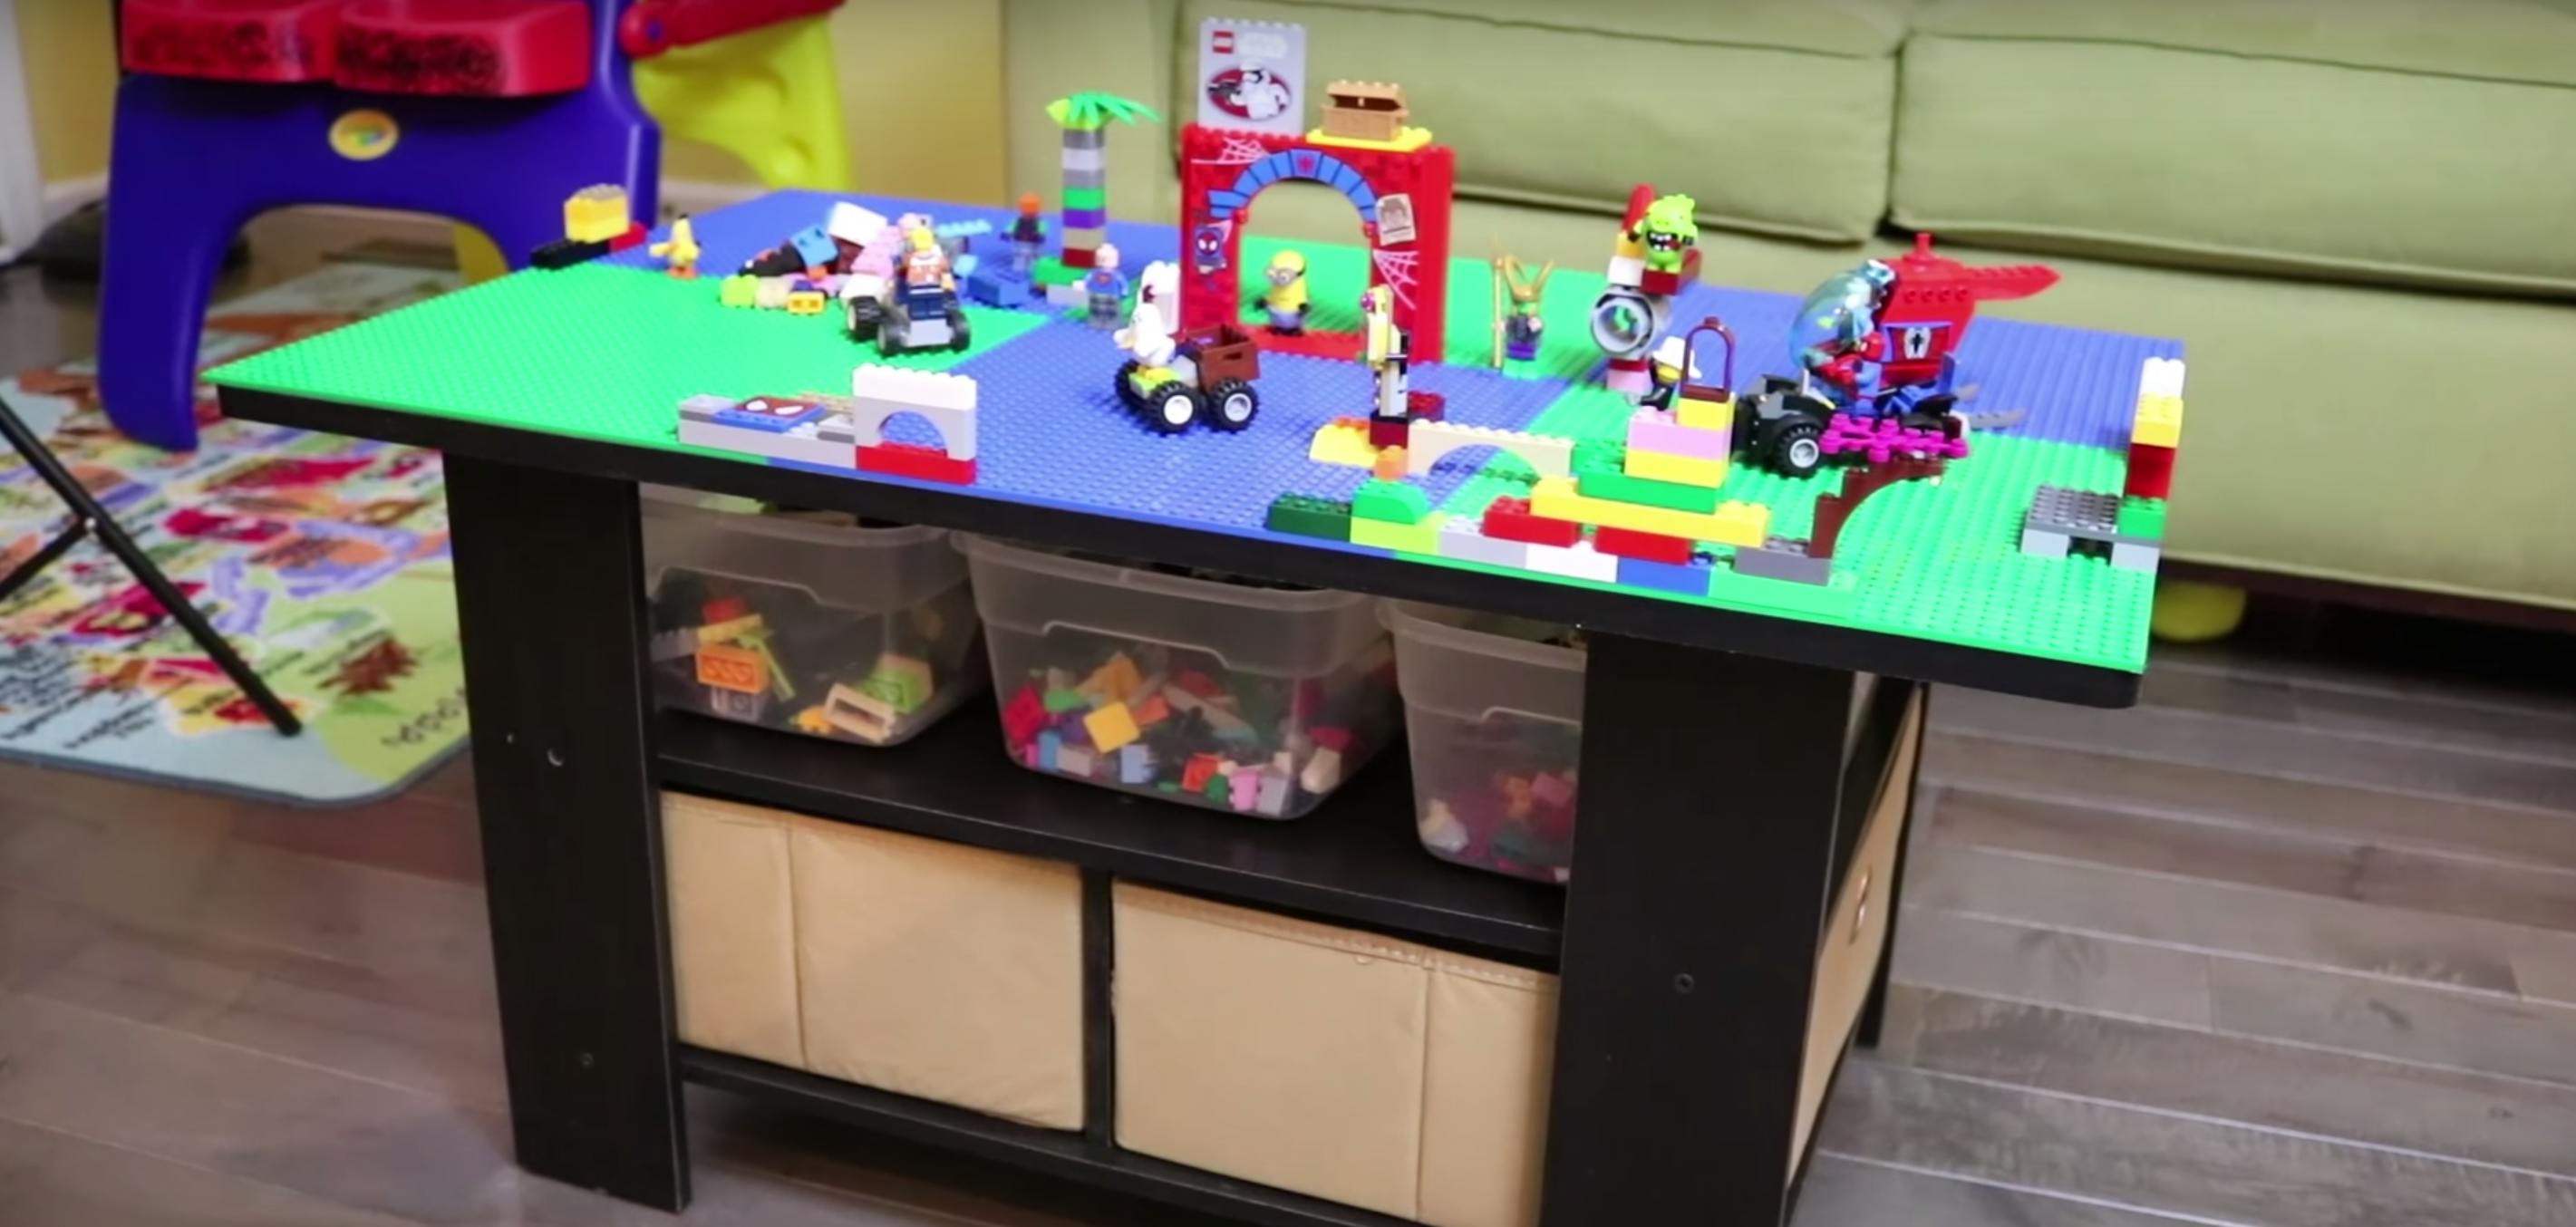 DIY Sliding Lego Table Keeps All Those Bricks in One Place